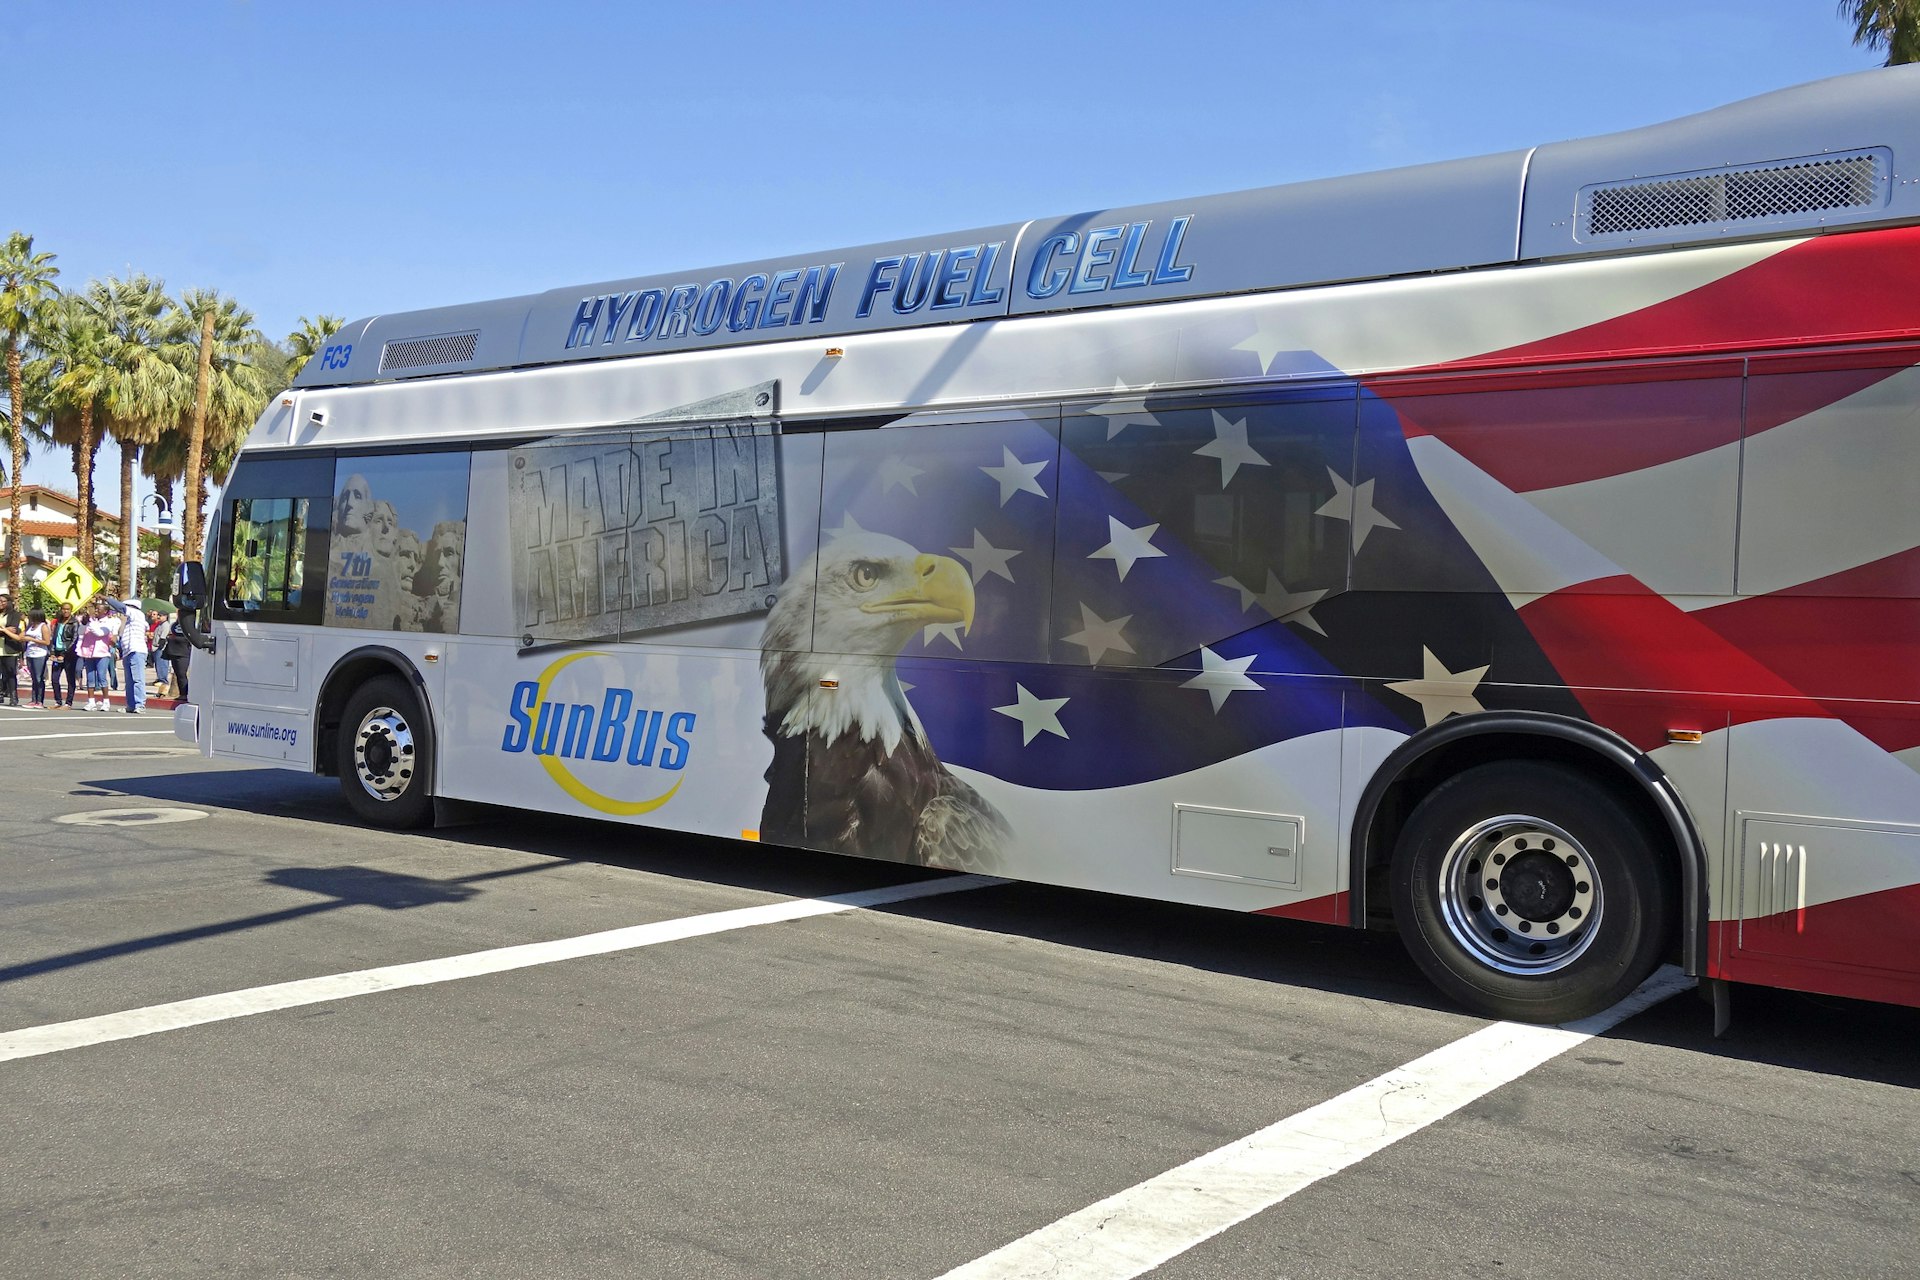 hydrogen fuel cell bus with American flag and eagle on the side